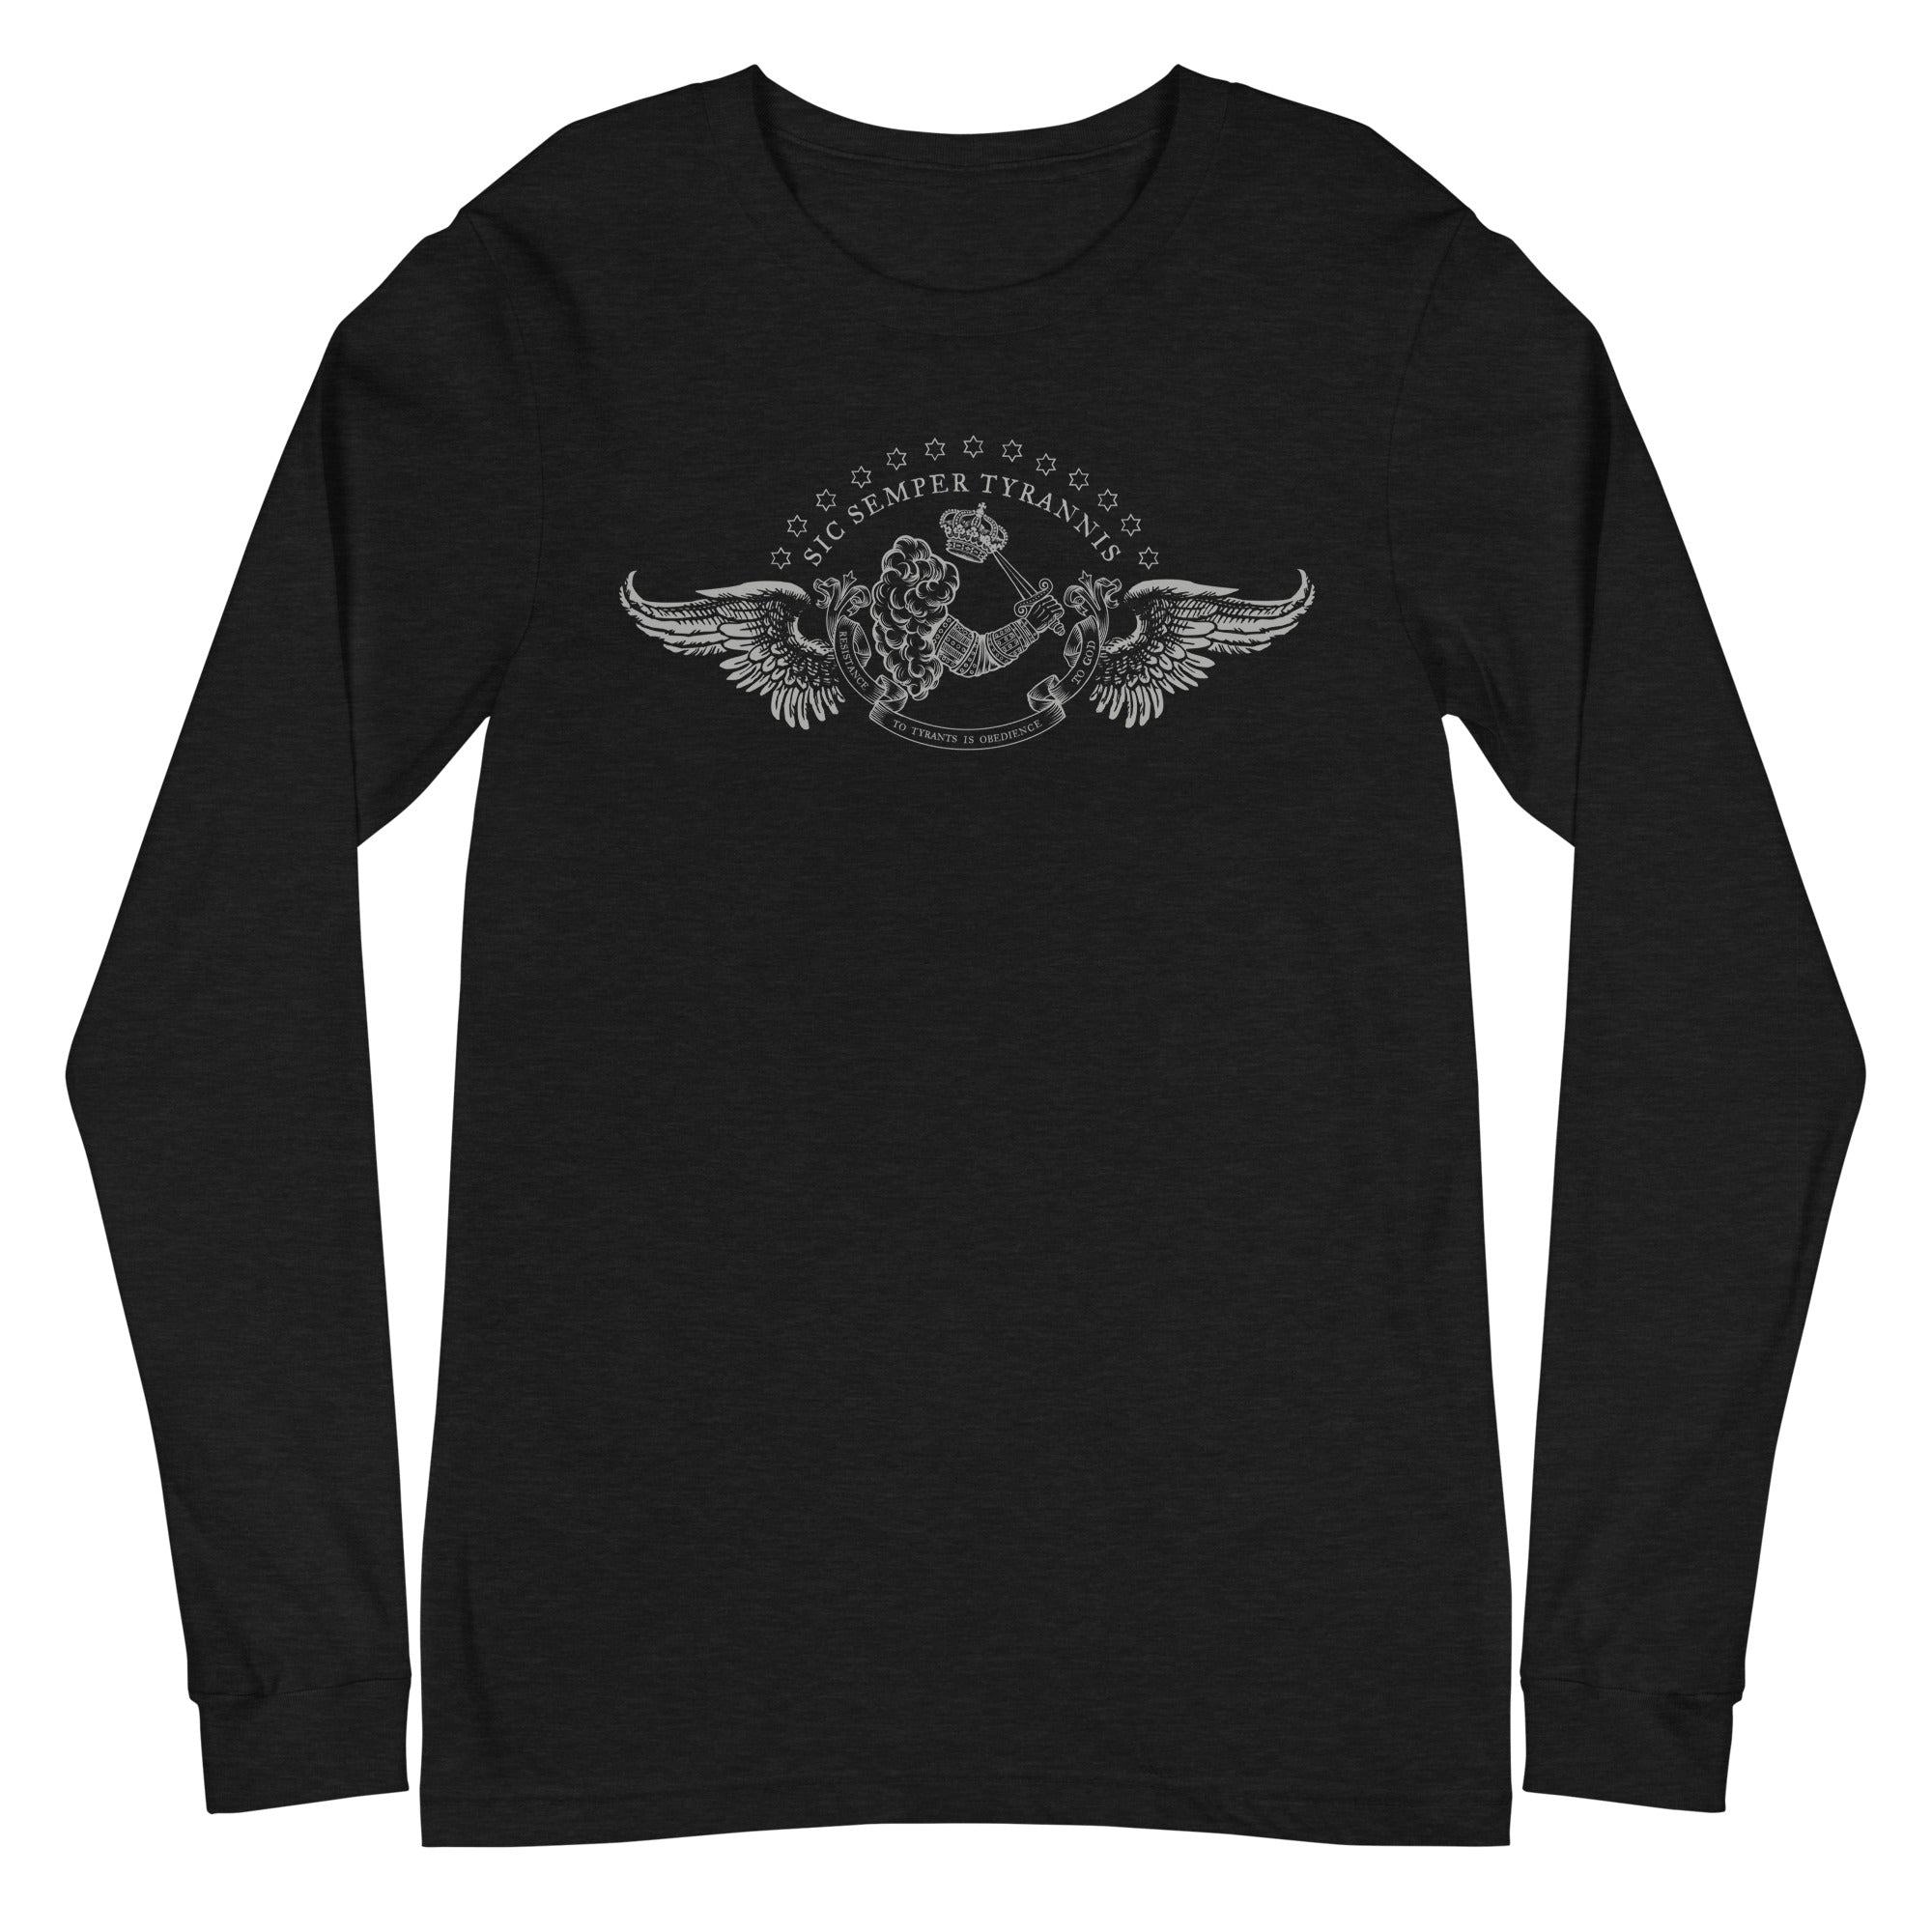 Sic Semper Tyrannis Obedience to God Long Sleeve Tee